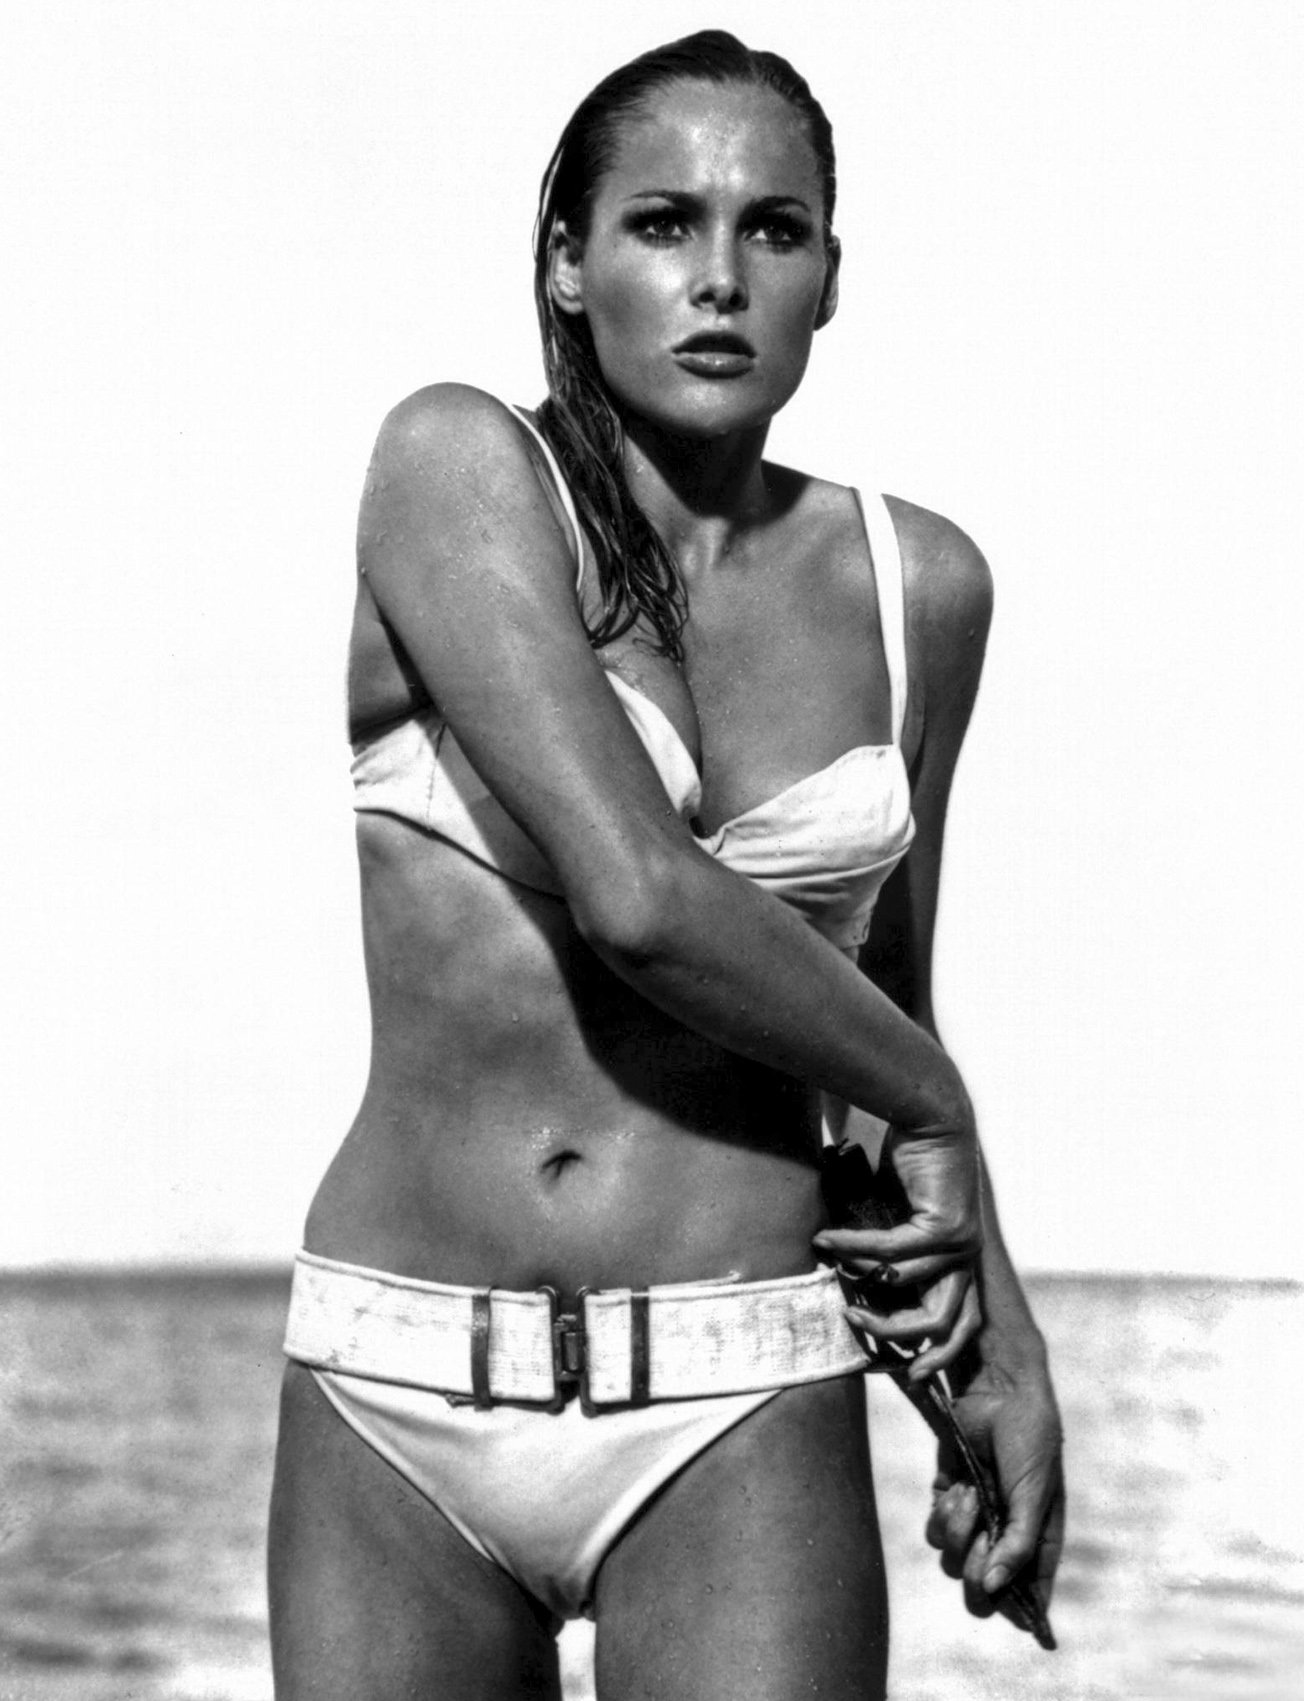 Wishing Ursula Andress a very happy 83rd birthday!
Seen here as Honey Ryder in Dr. No (1962). 